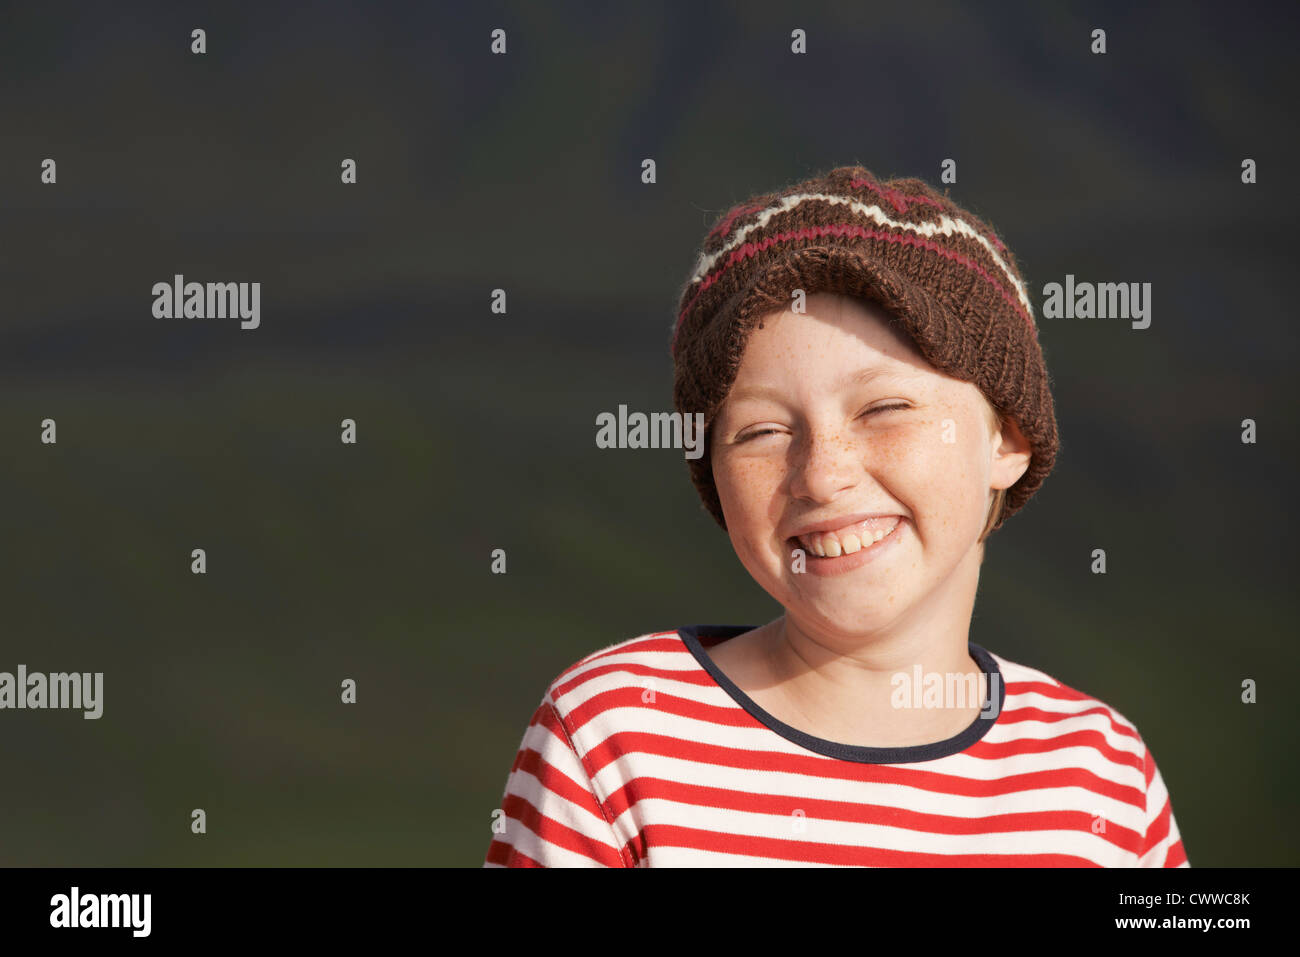 Smiling girl wearing knitted cap Stock Photo